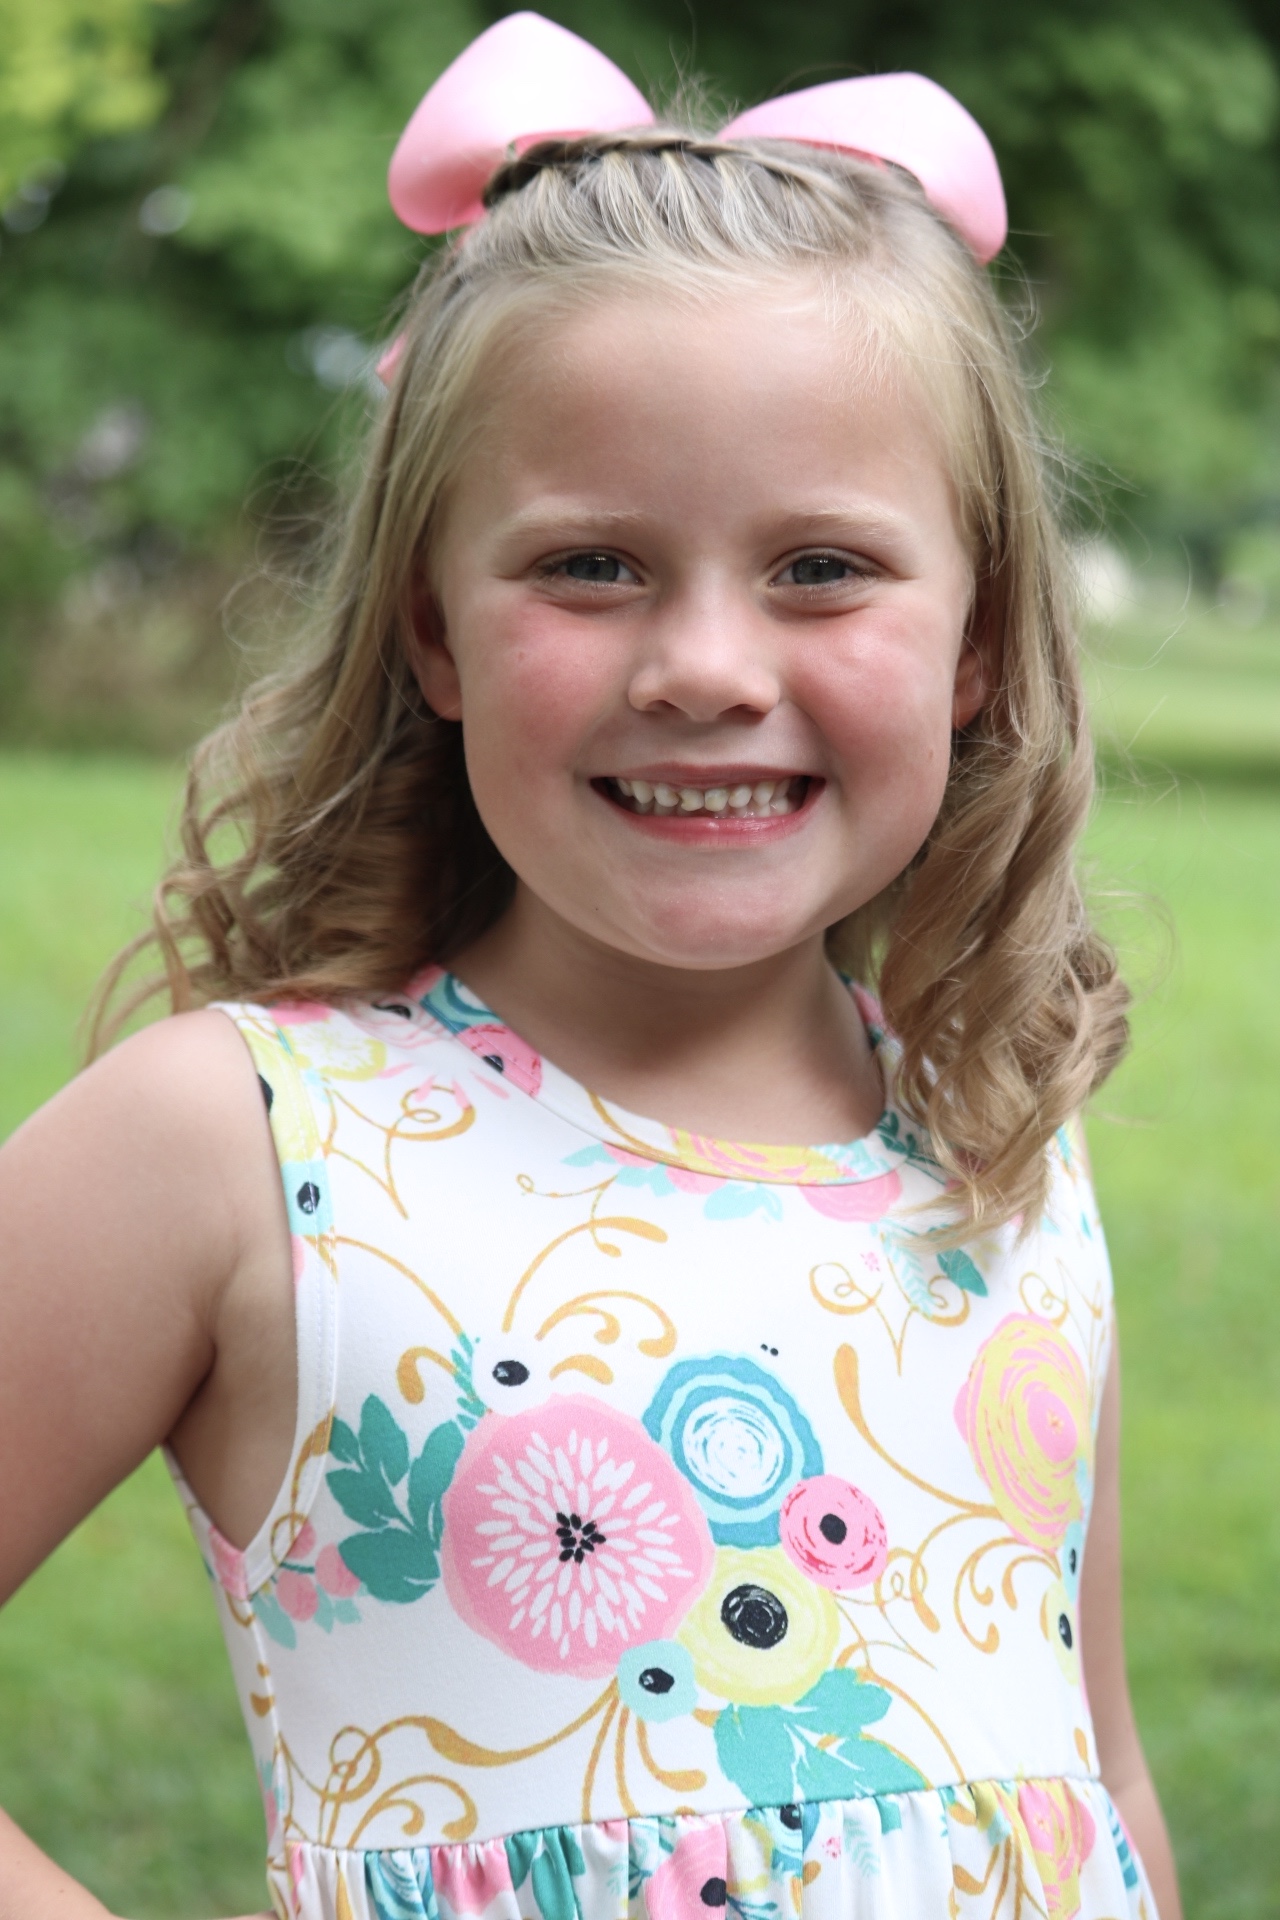 Little Miss Contestant - Kynlee Wells 5